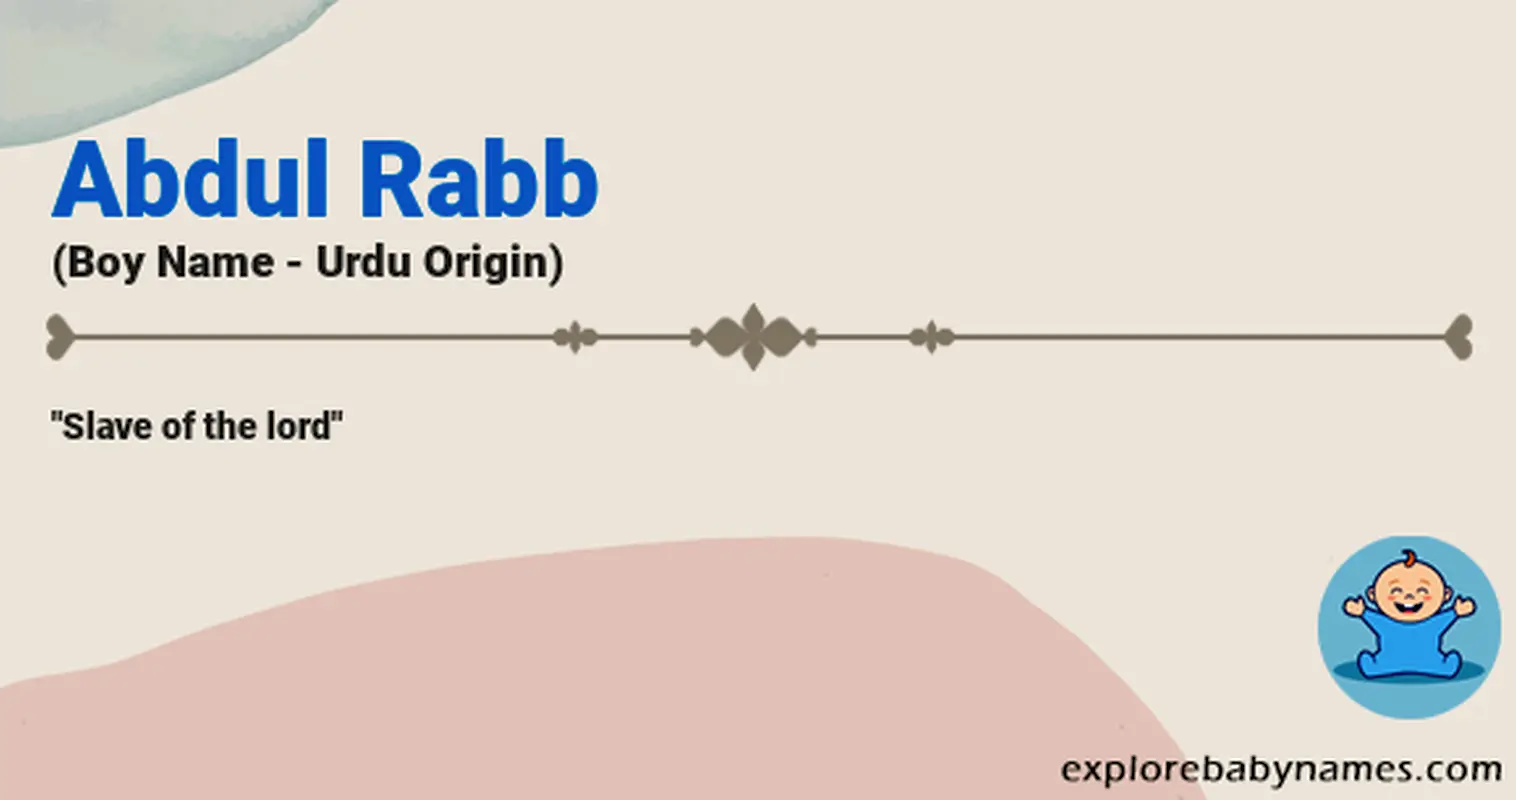 Meaning of Abdul Rabb